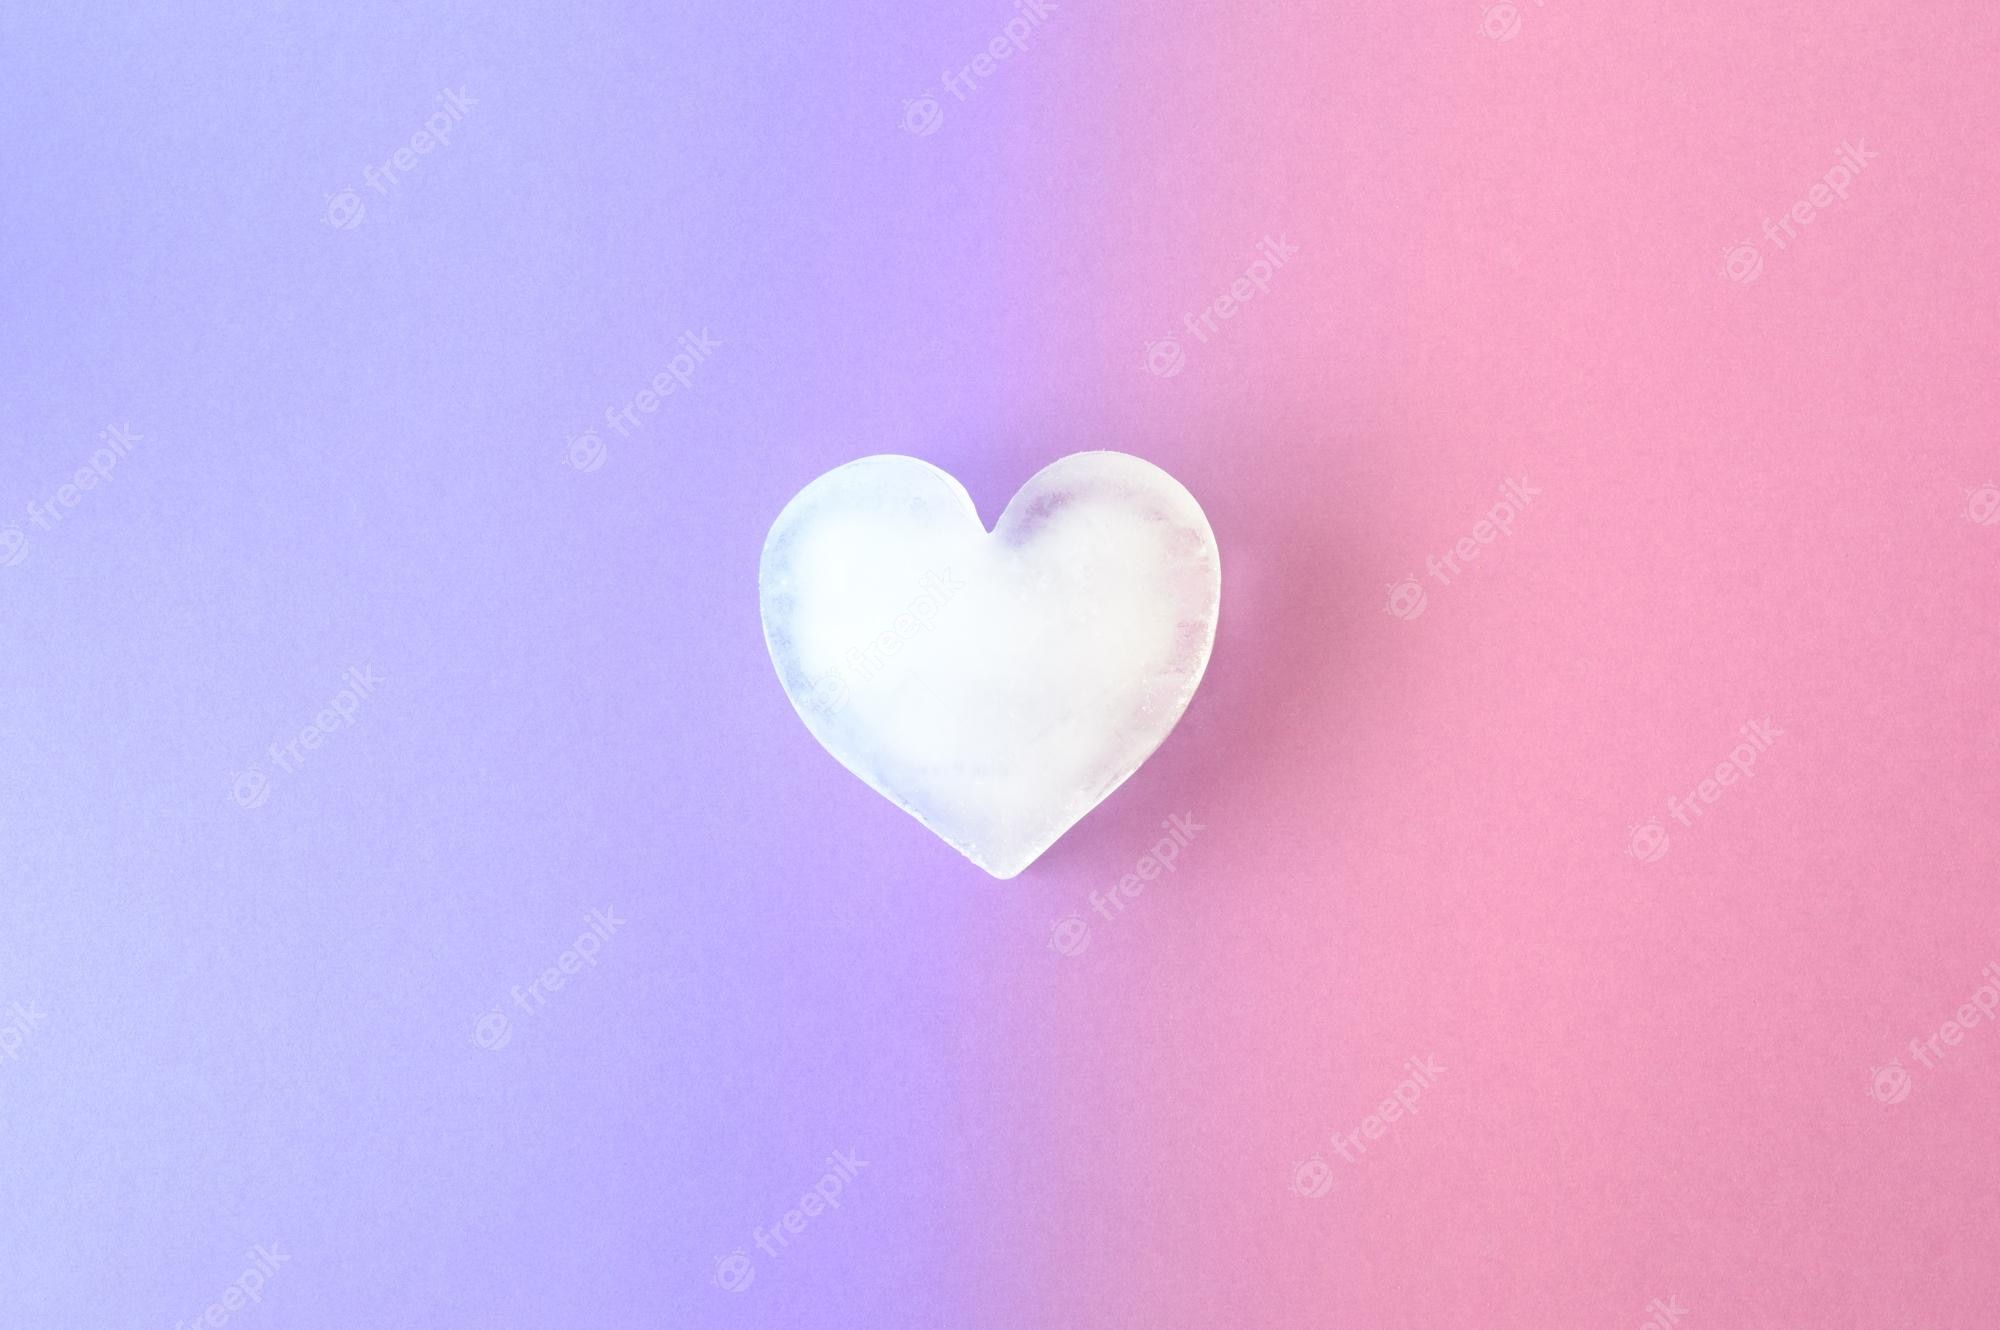 Premium Photo. Icy heart on a combination of purple and pink background colors valentines ice love aesthetic concept visual vibrant colors